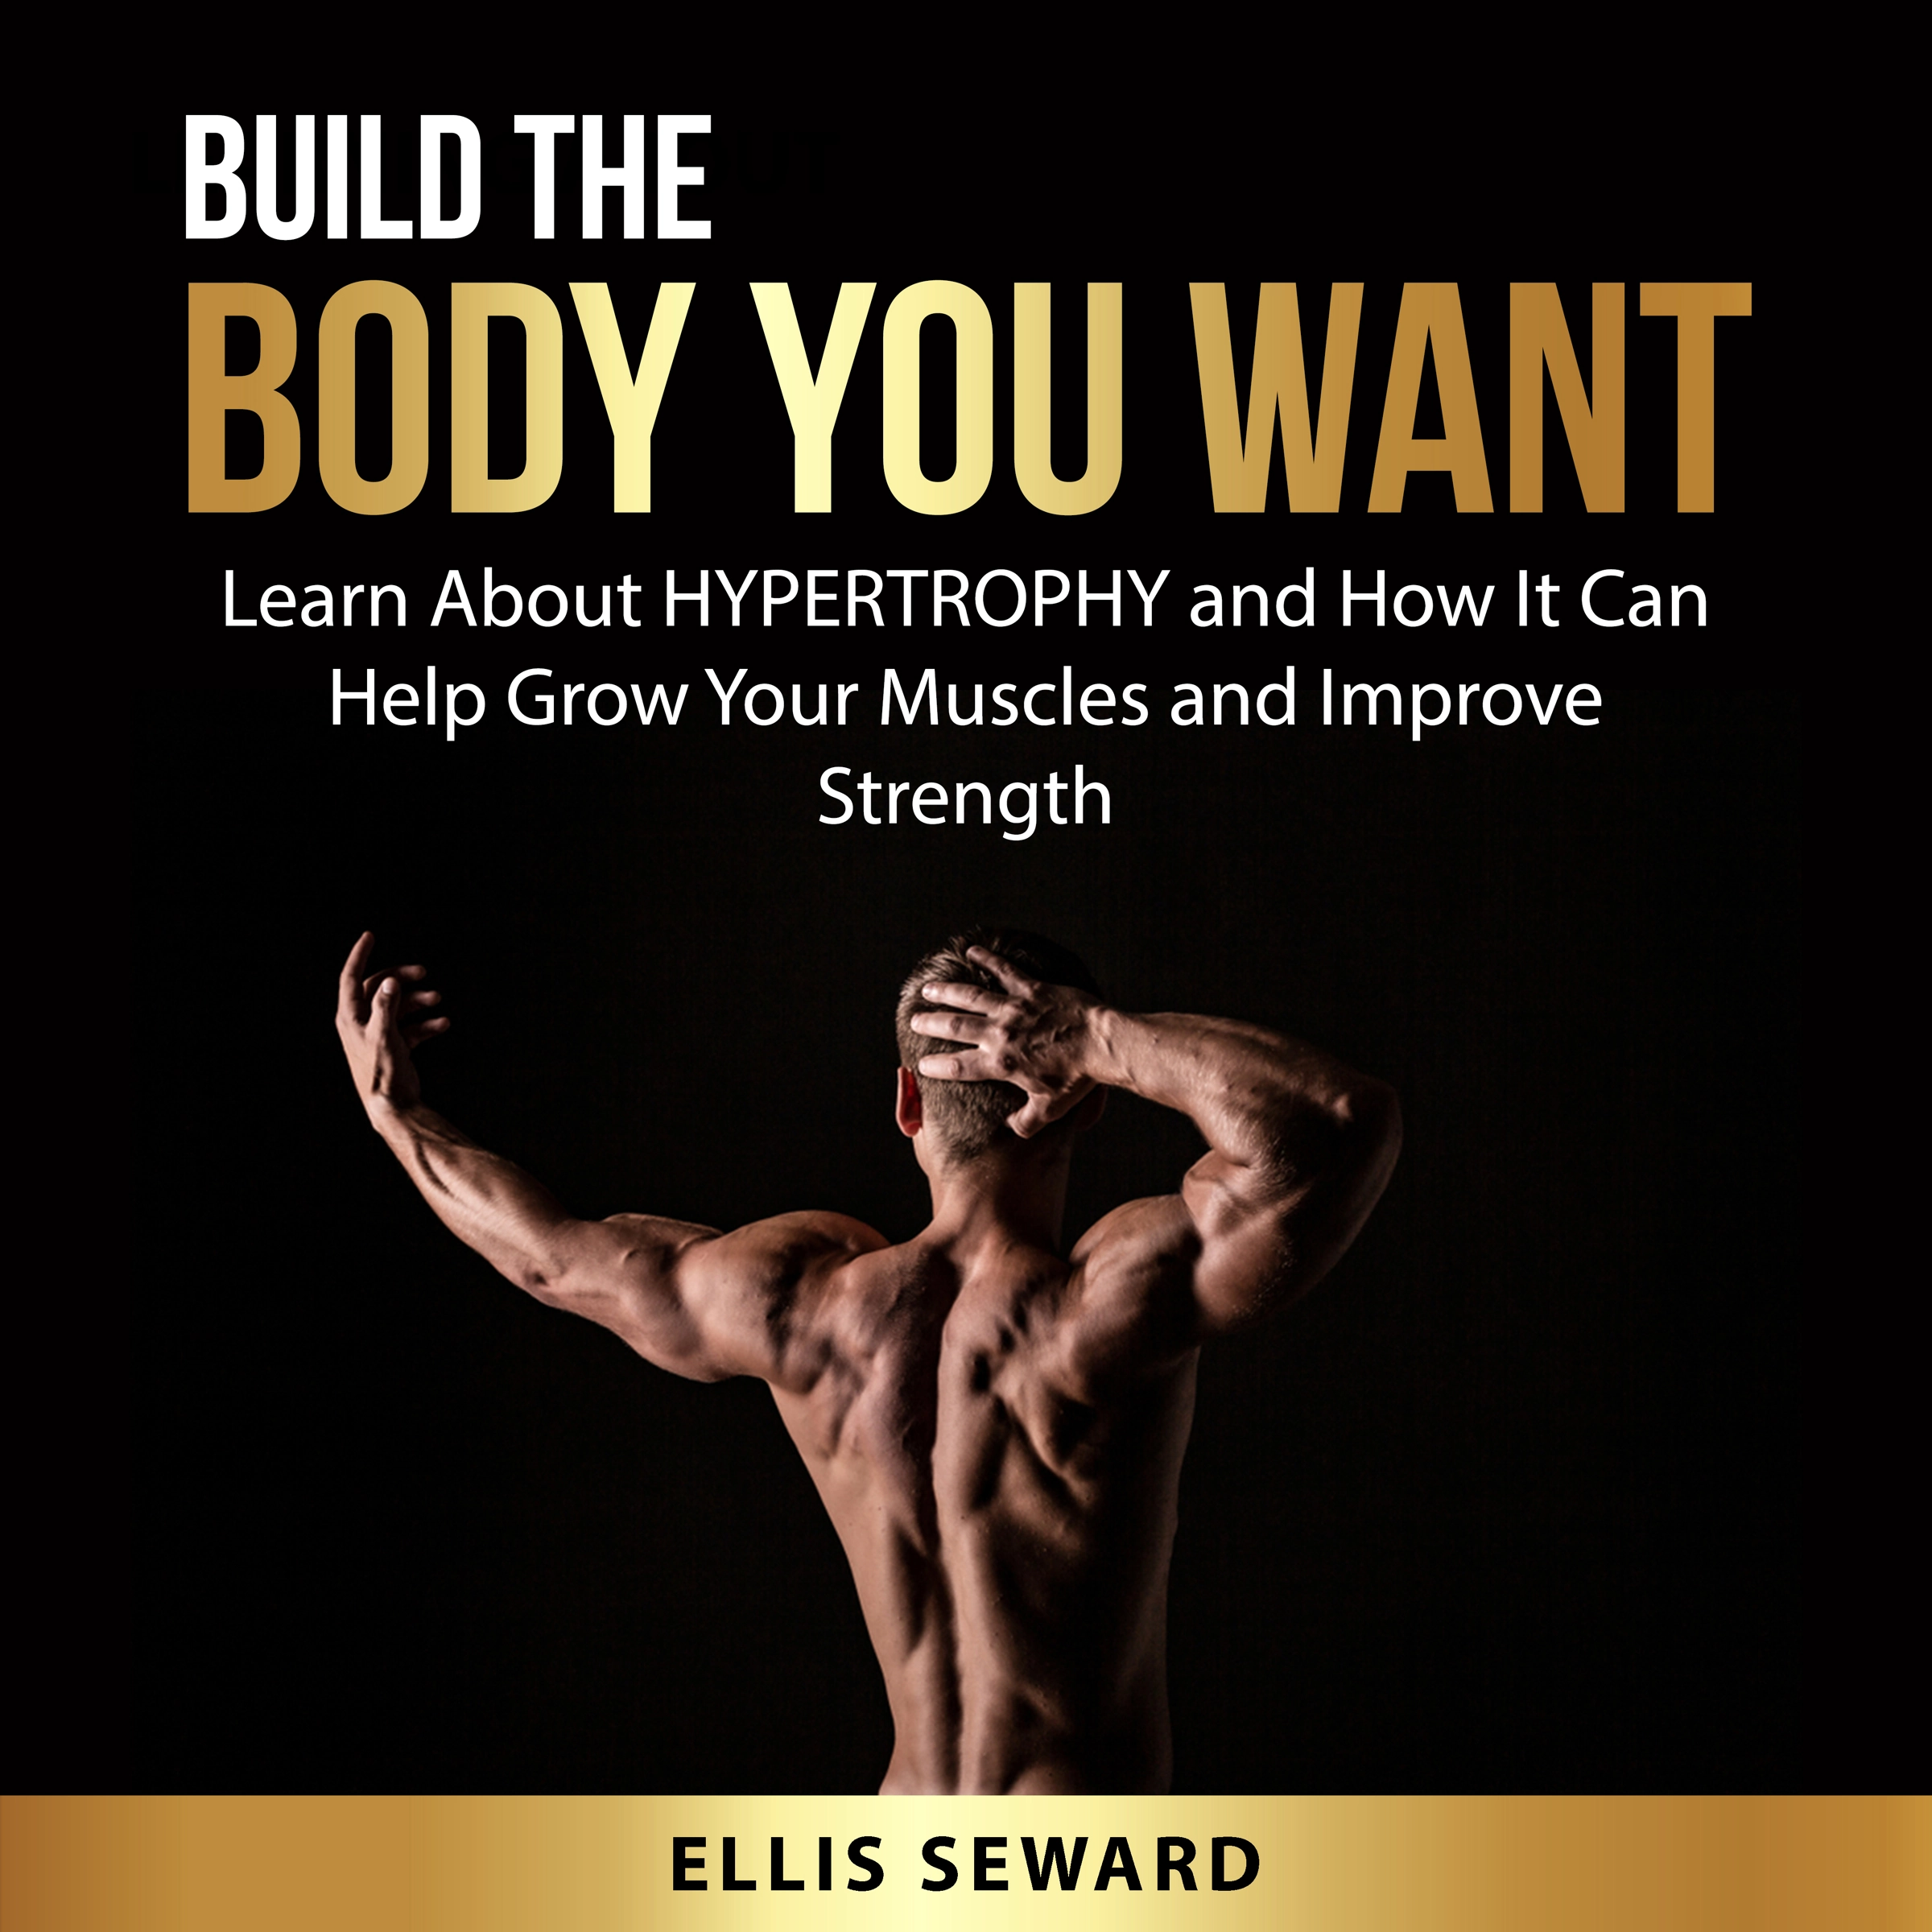 Build the Body You Want Audiobook by Ellis Seward